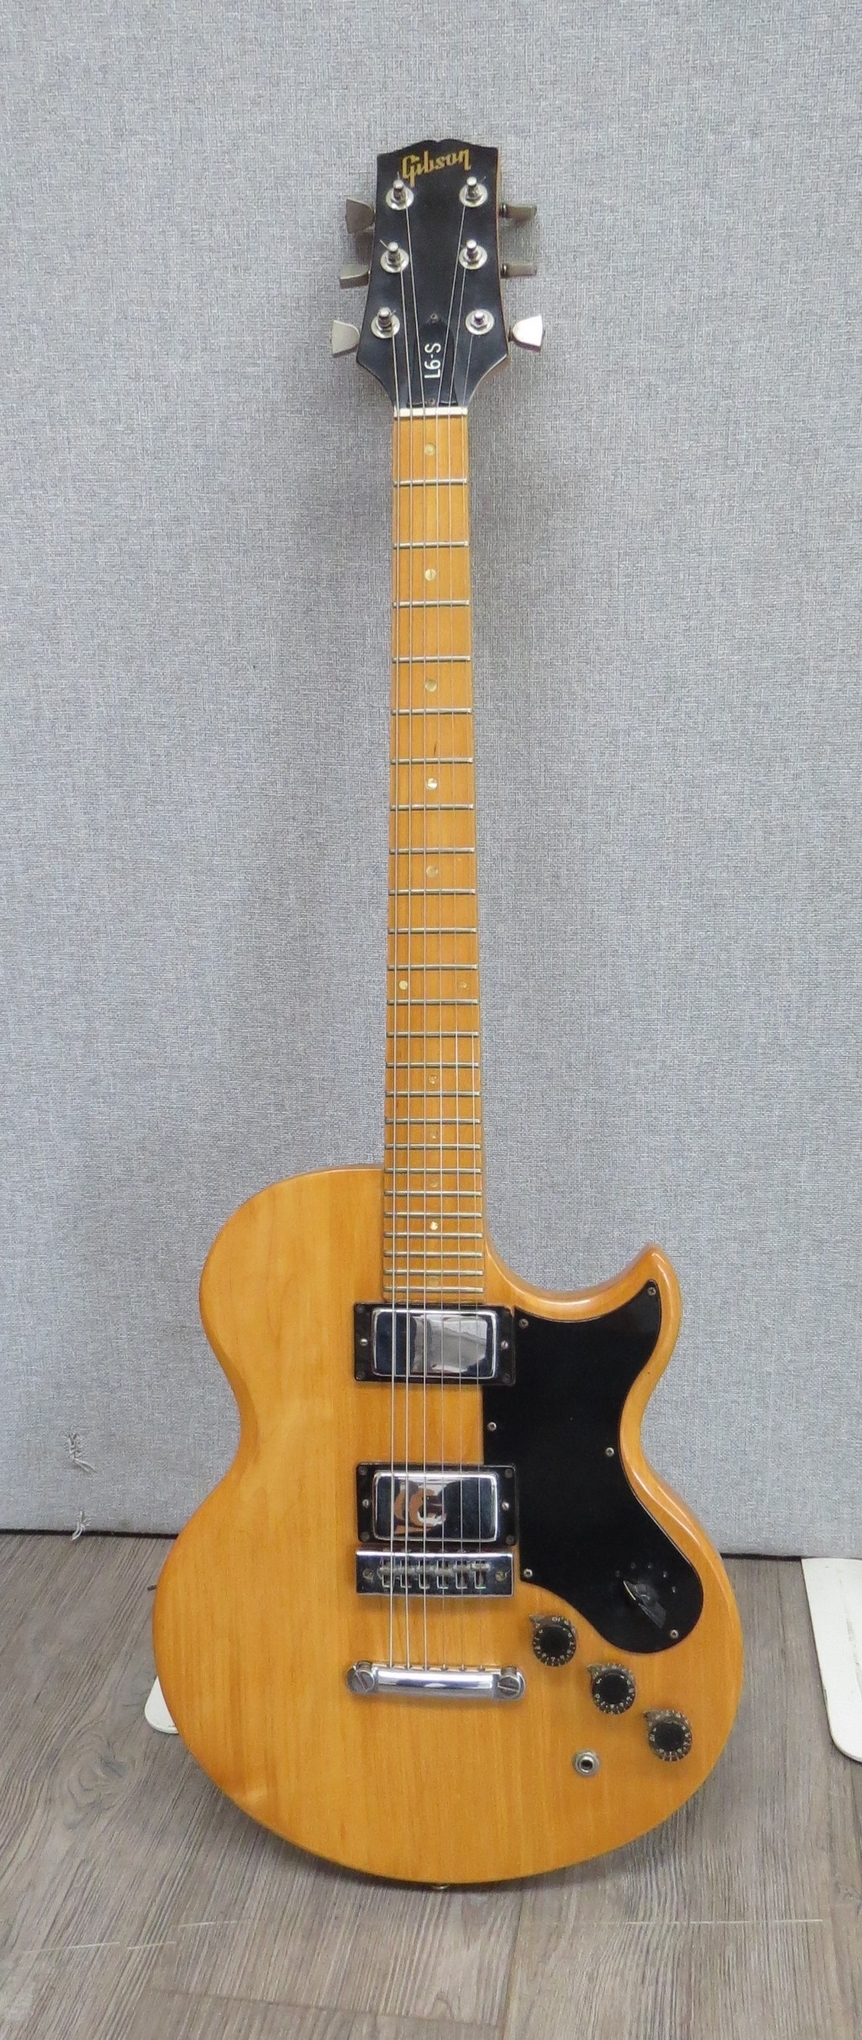 A Gibson L6-S electric guitar with maple body and neck, black pickguard, twin humbucker pickups, - Image 3 of 6